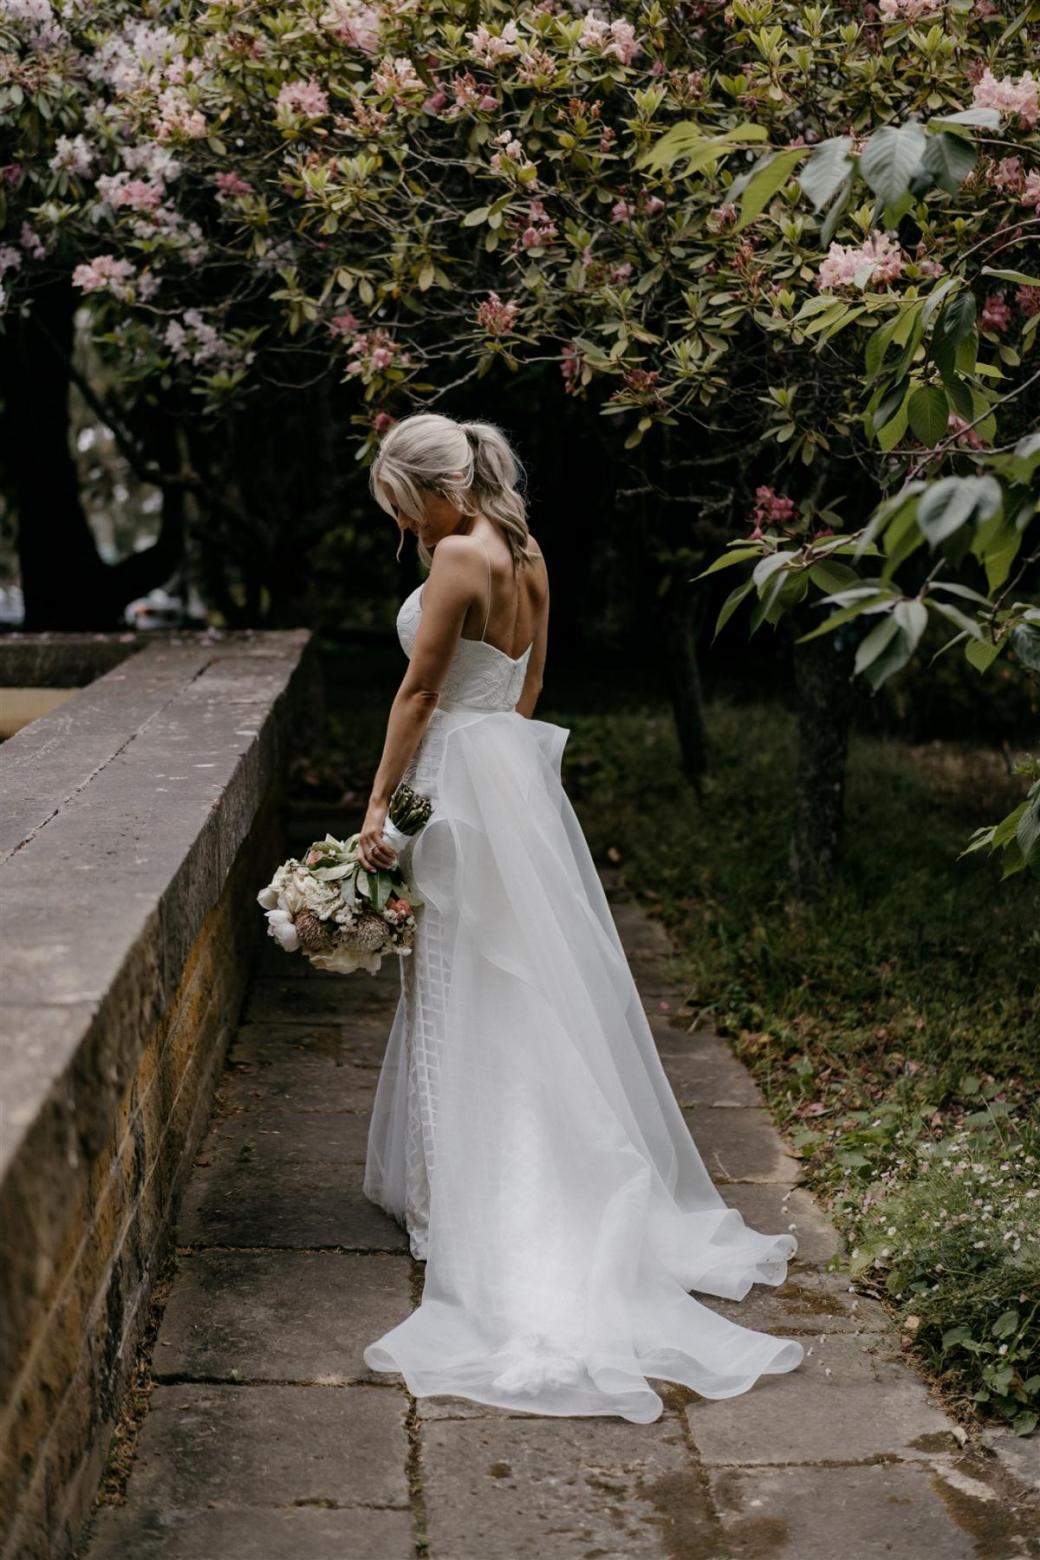 KWH bride Ashleigh wearing the Elodie gown, a modern lace wedding dress, paired with our Oval Trains for added drama.